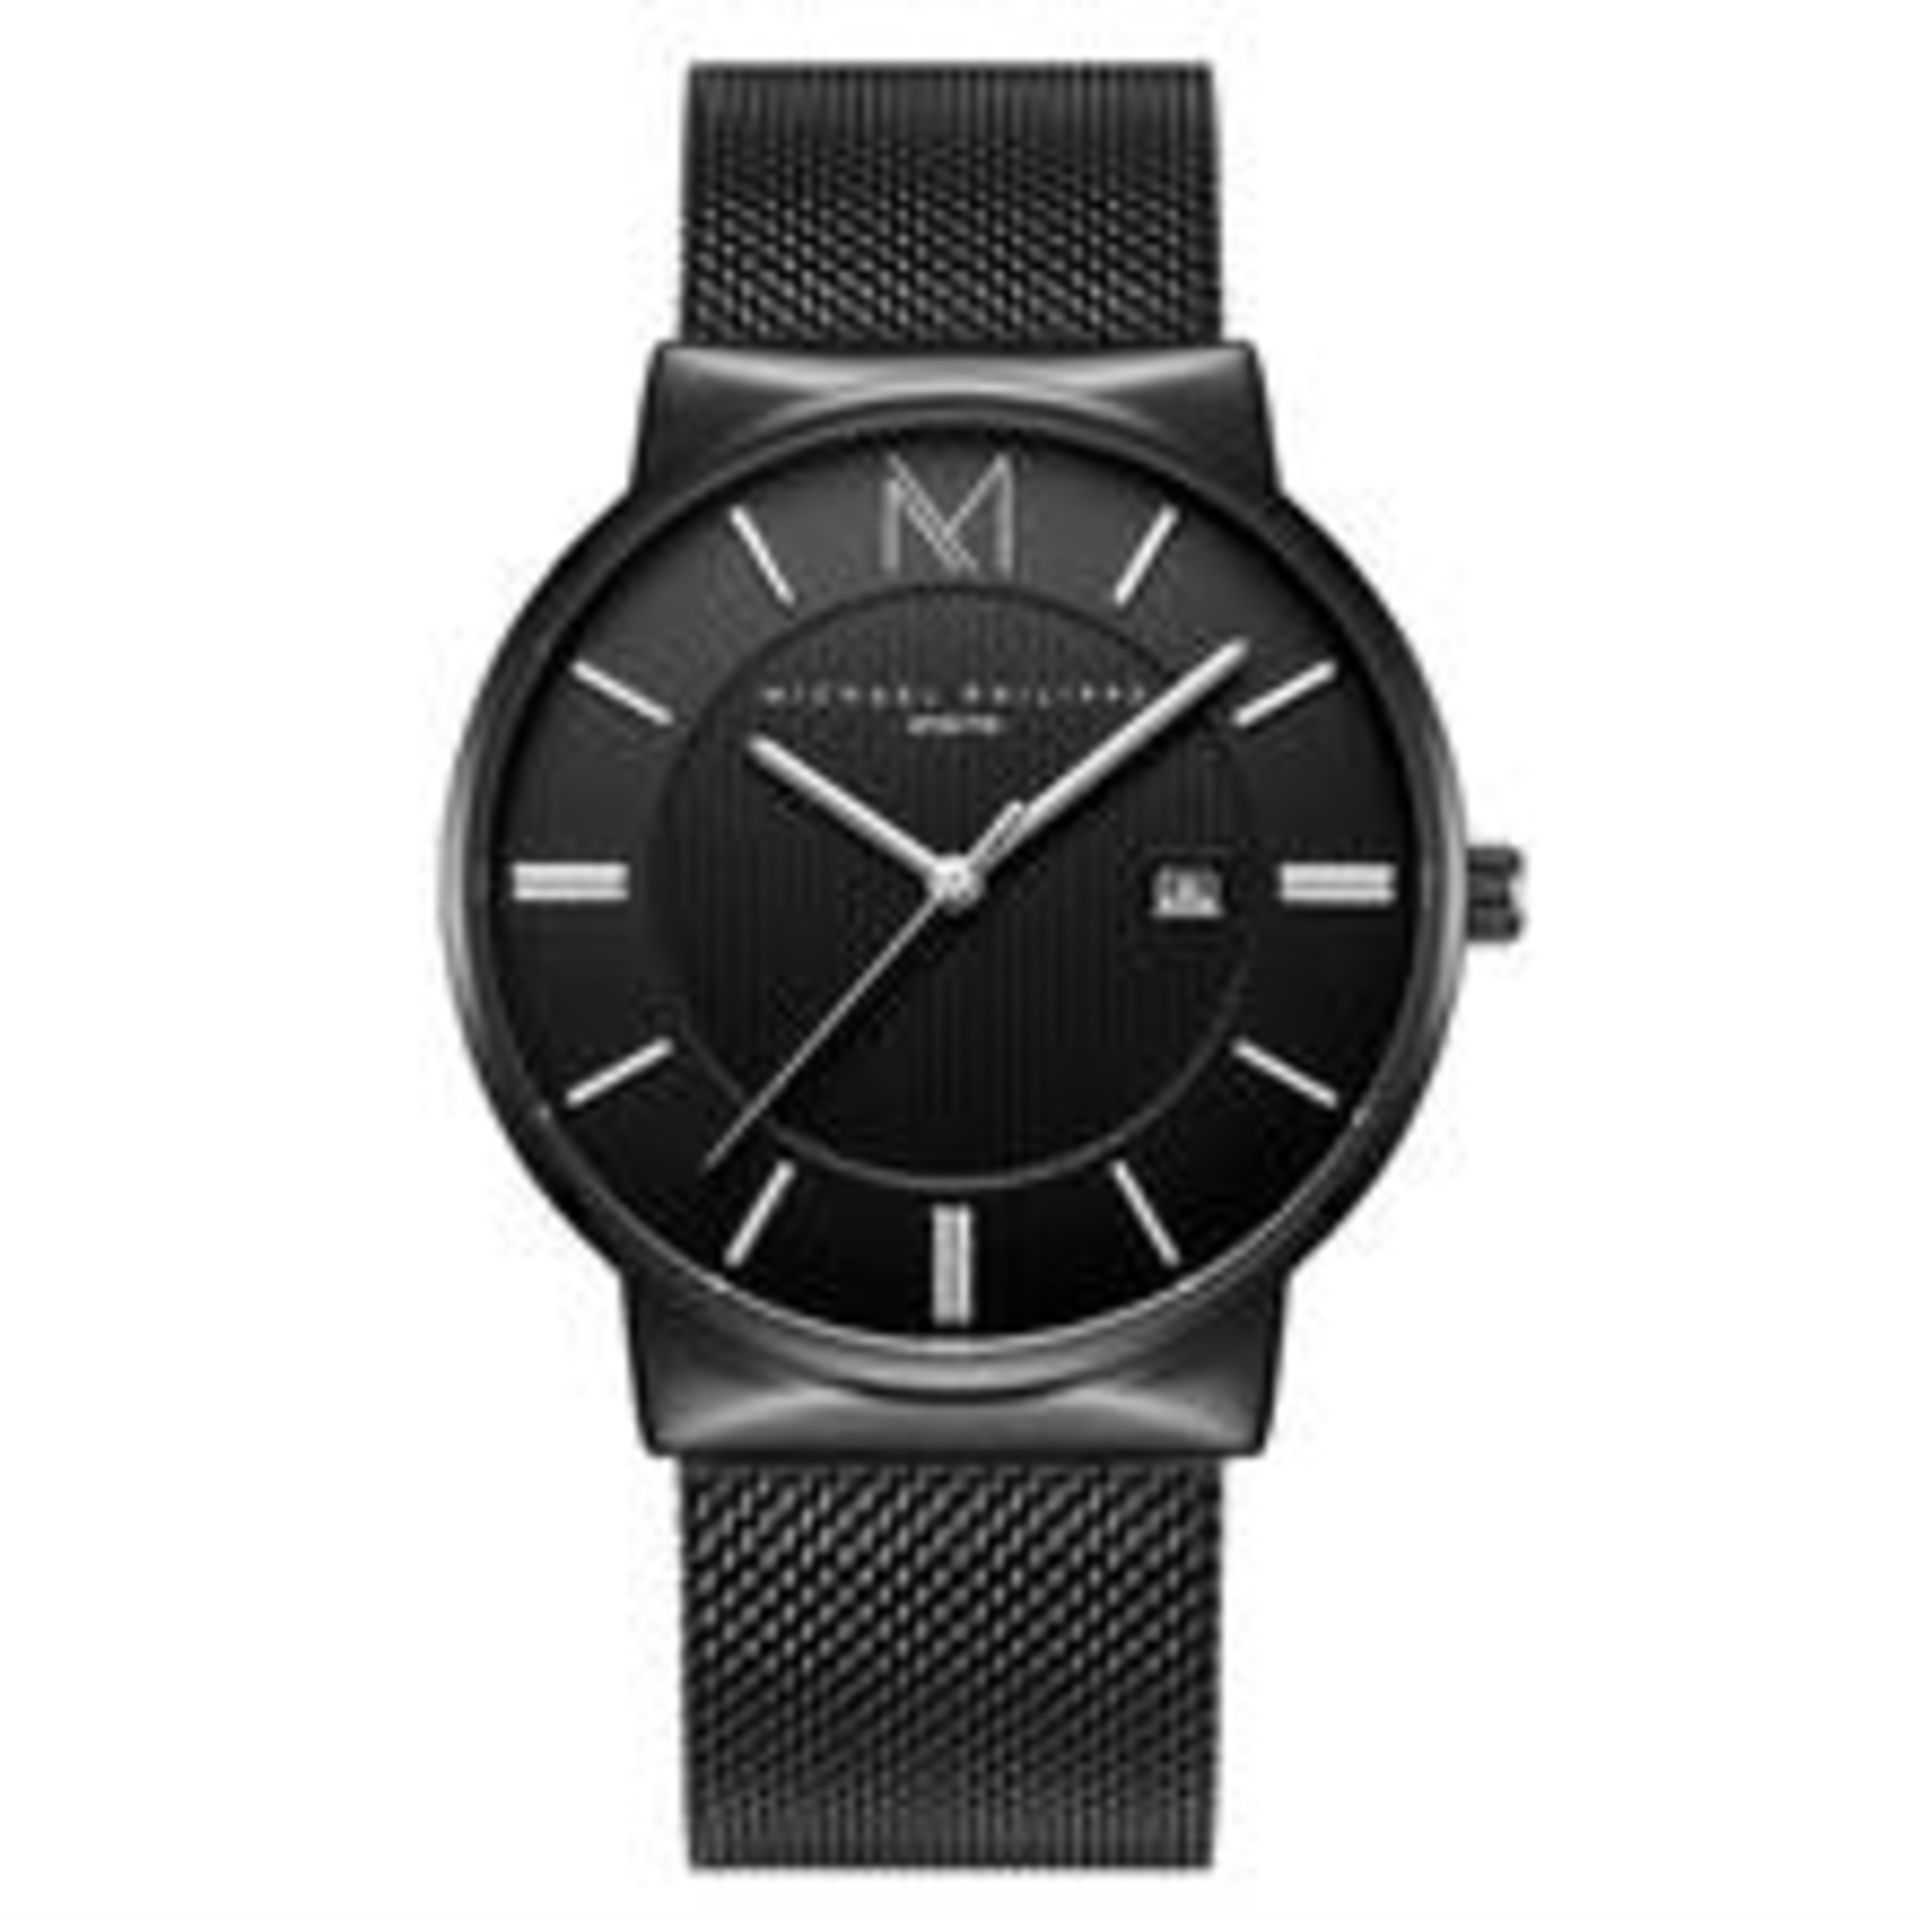 V Brand New Michael Philippe Gents Jetsetter Watch - ISP £159.99 - Image 2 of 2